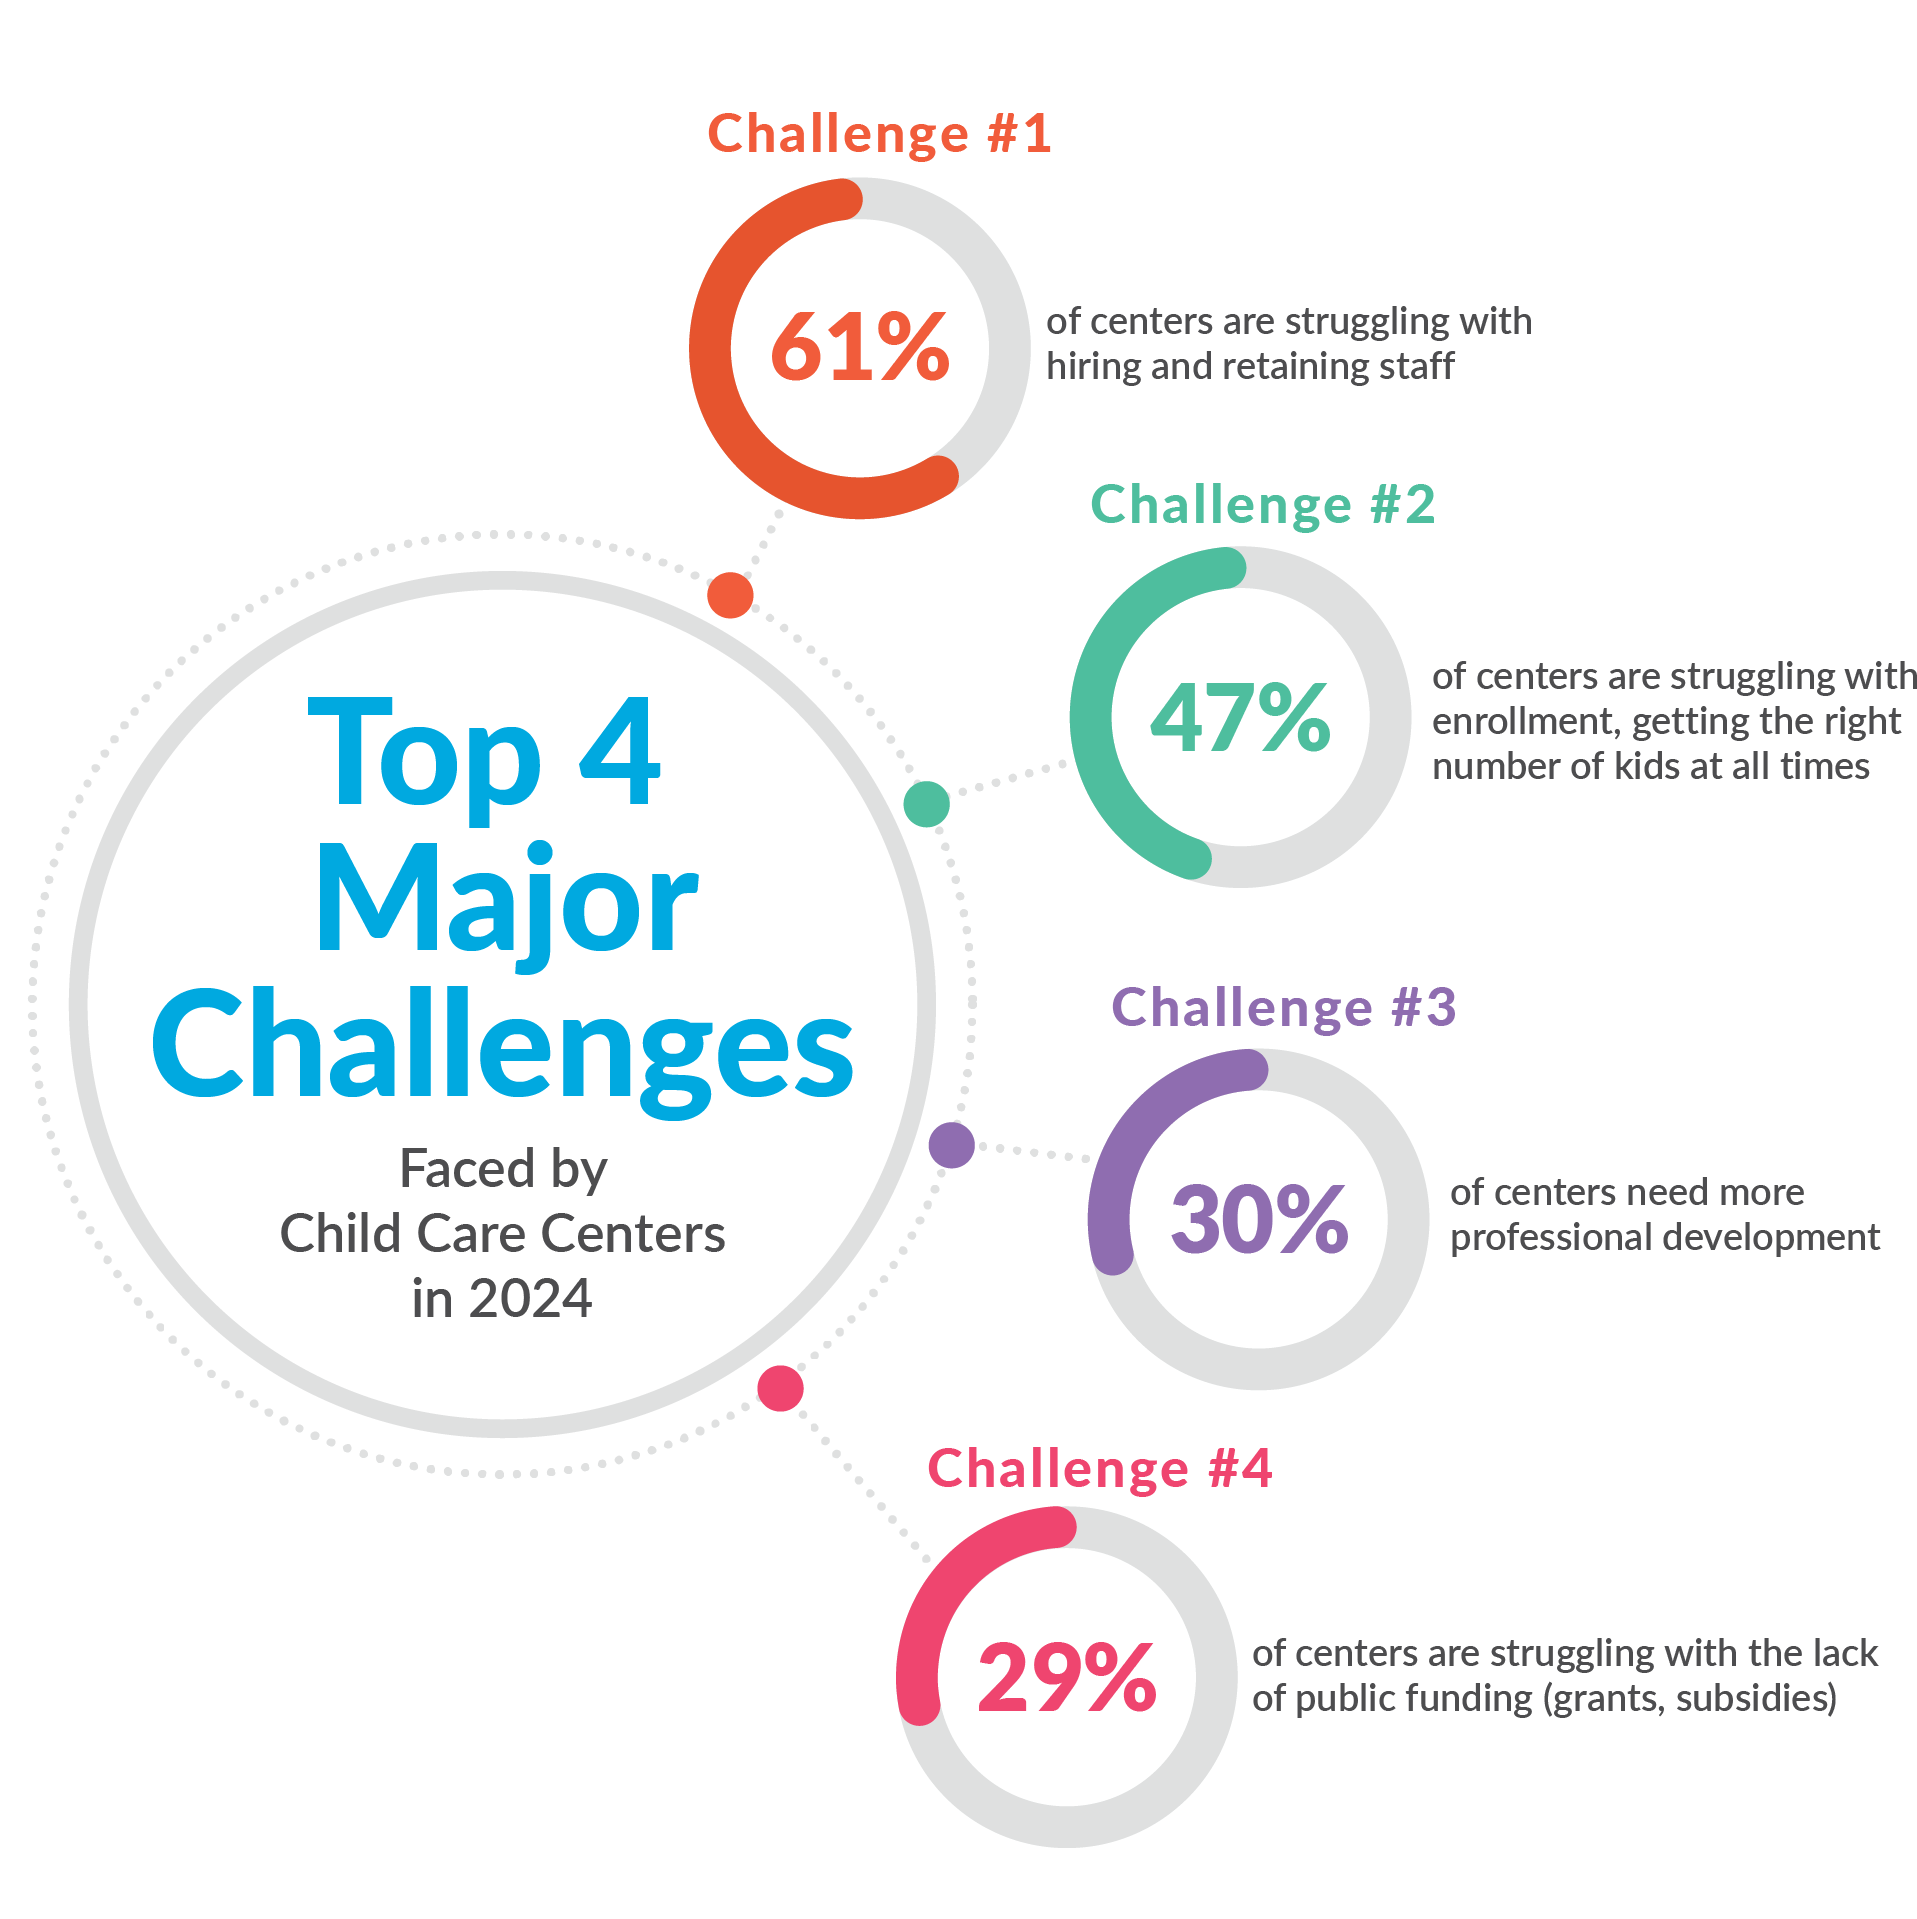 Graphic showing the top 4 major challenges facing child care centers in 2024